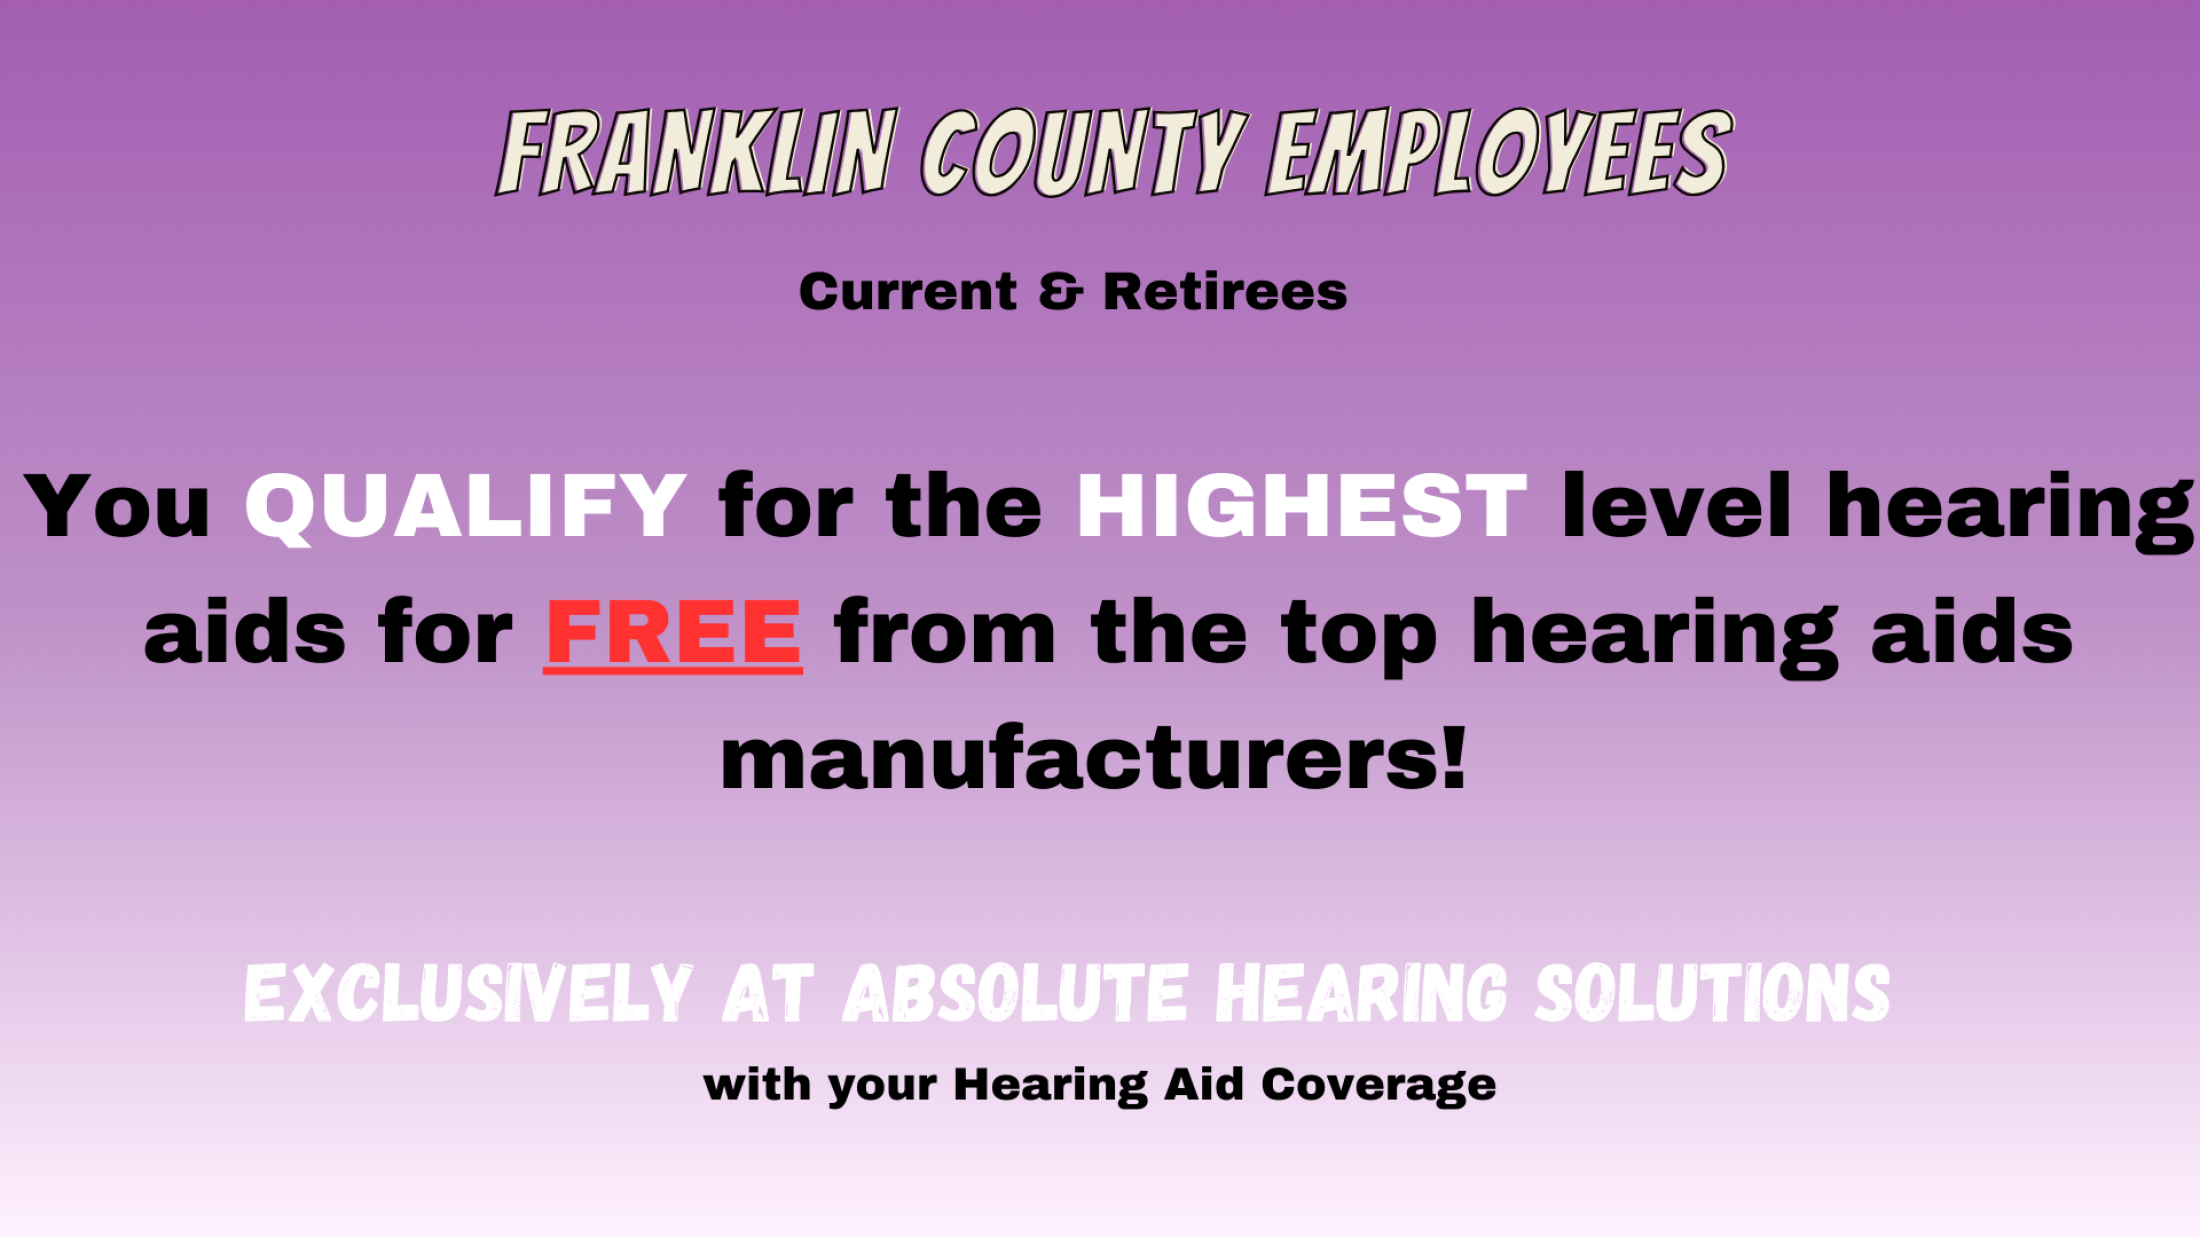 Franklin County  Employees Qualify For Free highest level hearing aids with Absolute Hearing Solutions